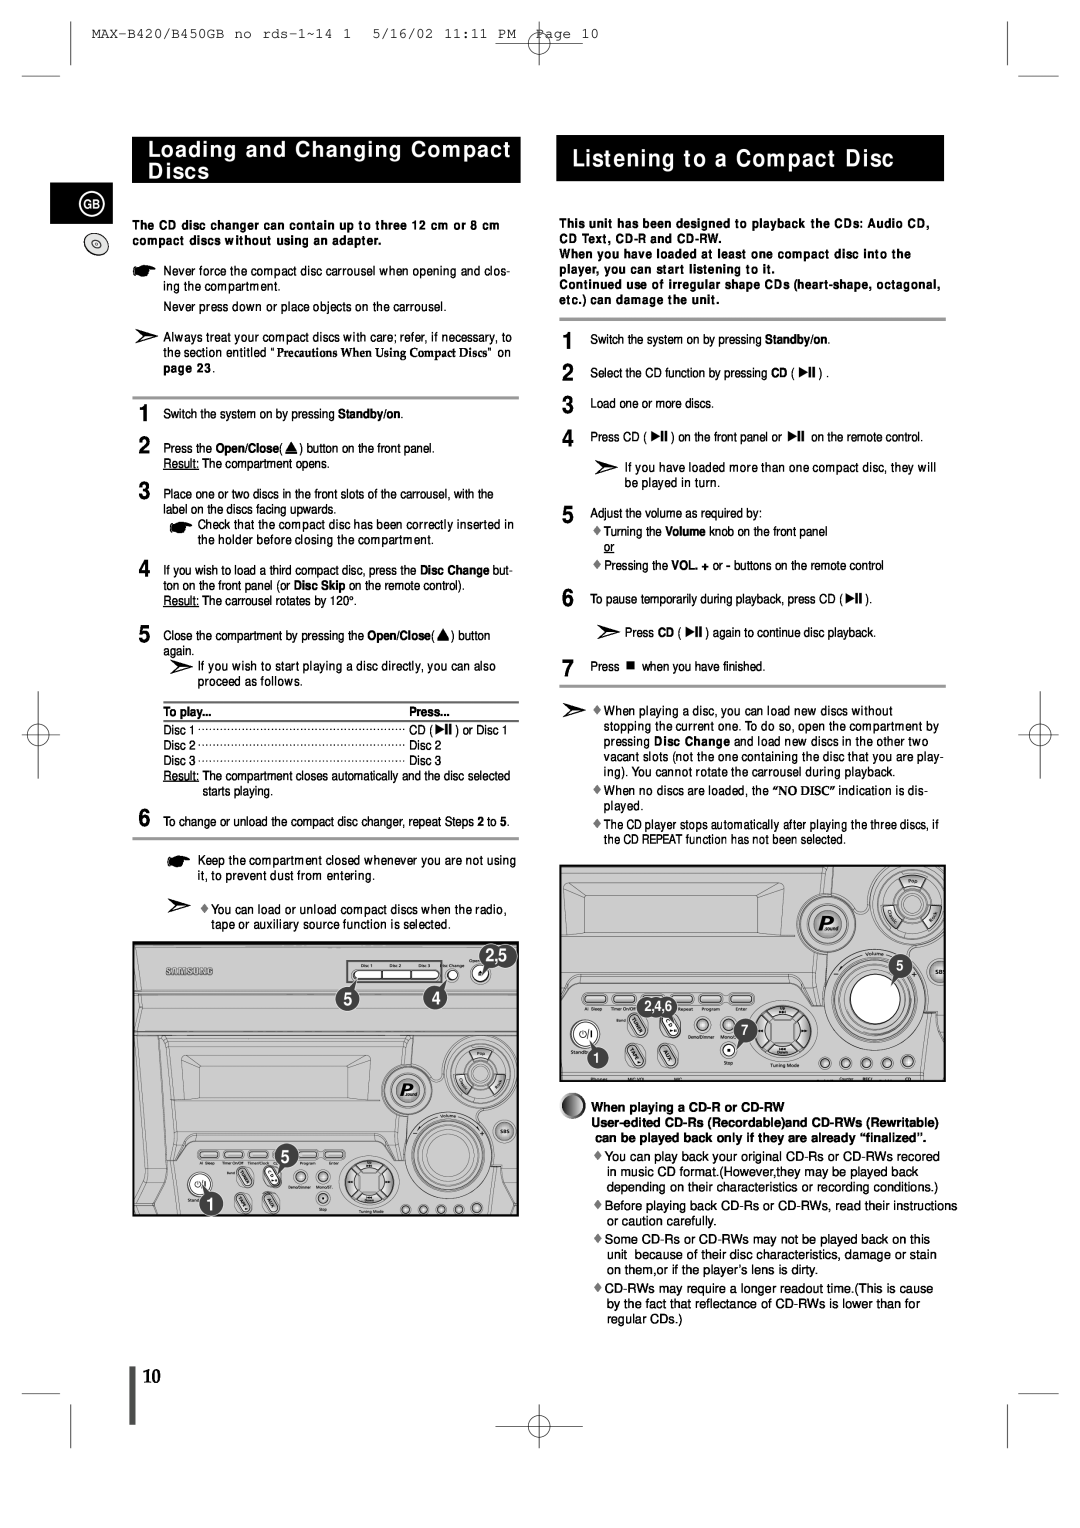 Samsung MAX-B450 instruction manual Listening to a Compact Disc, Loading and Changing Compact Discs, 2,4,6, To play 